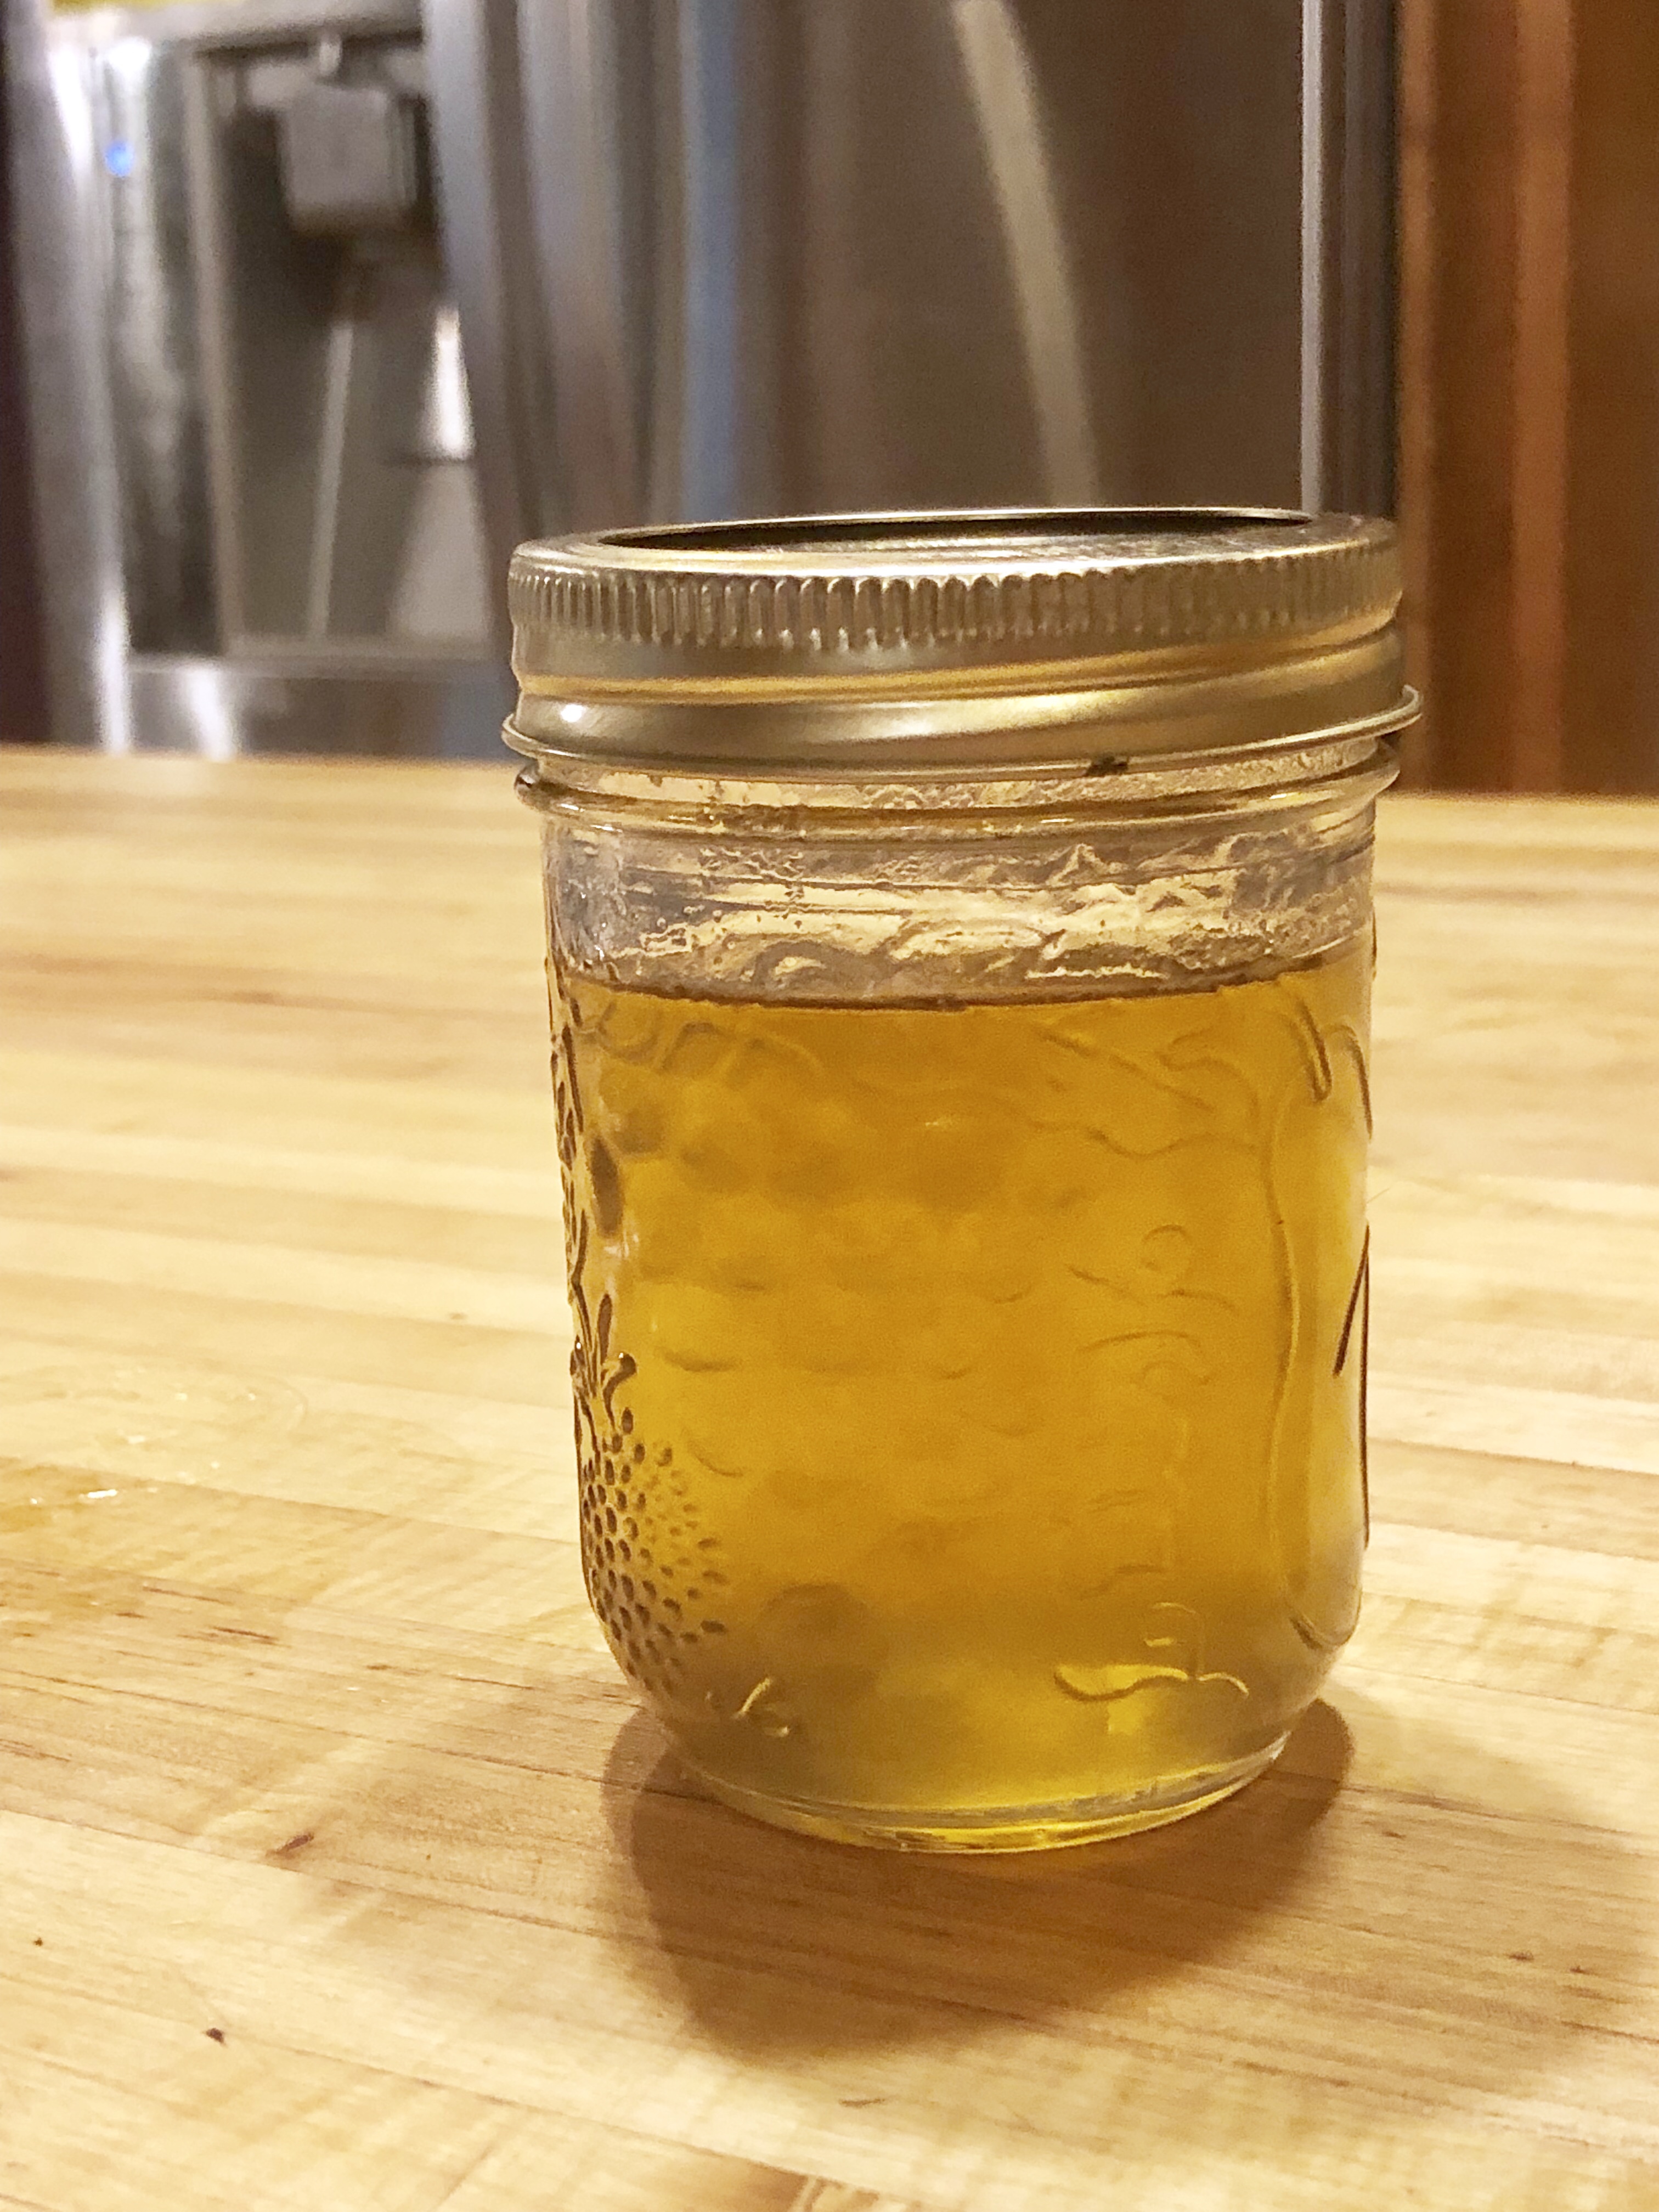 A jar of yellow dandelion jelly in a kitchen 